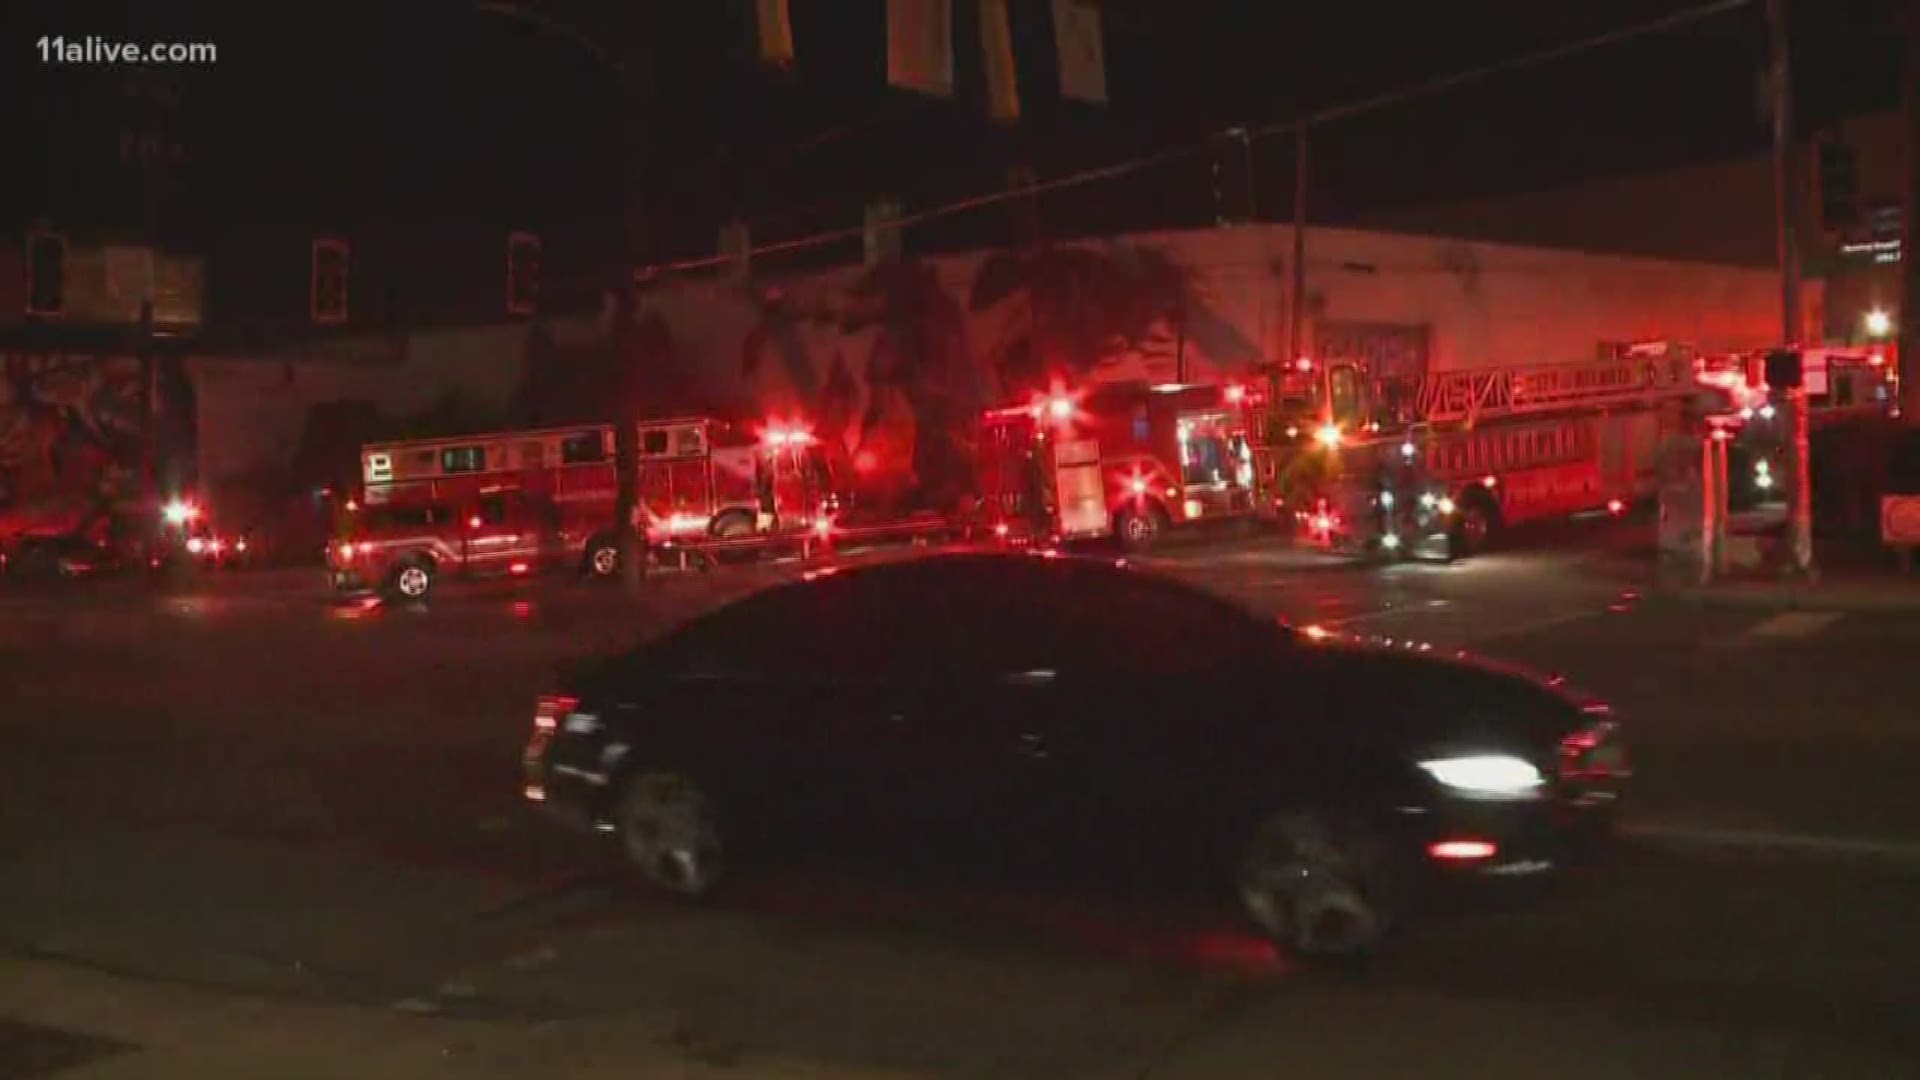 Crews responded around 9:30 p.m. to 716 Ponce de Leon Ave NE to fight the flames at the business.